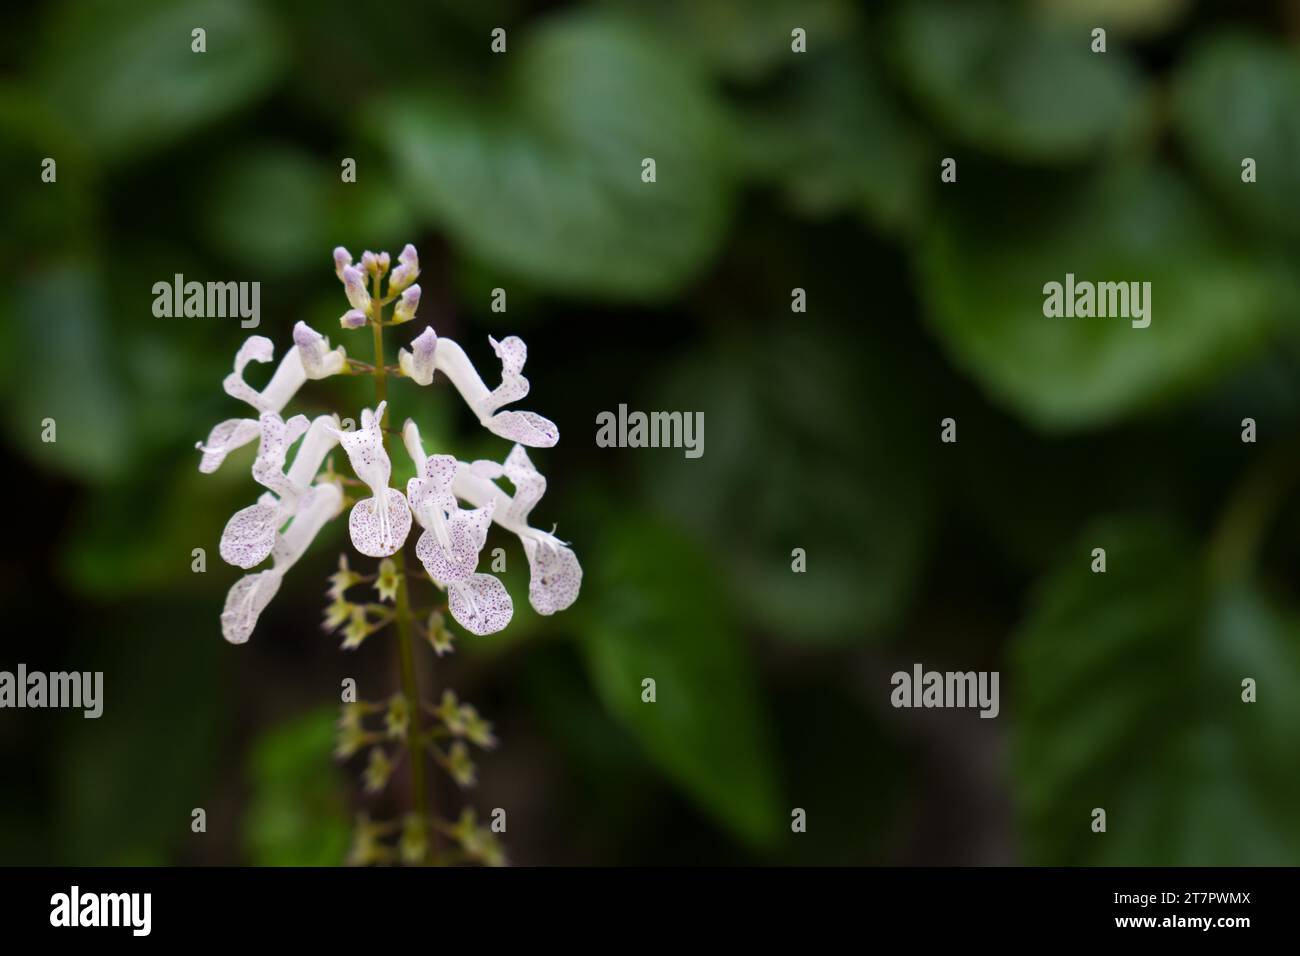 Closeup of the flower of the money plant (Plectranthus) verticillatus, in the foreground with the plant in the background Stock Photo